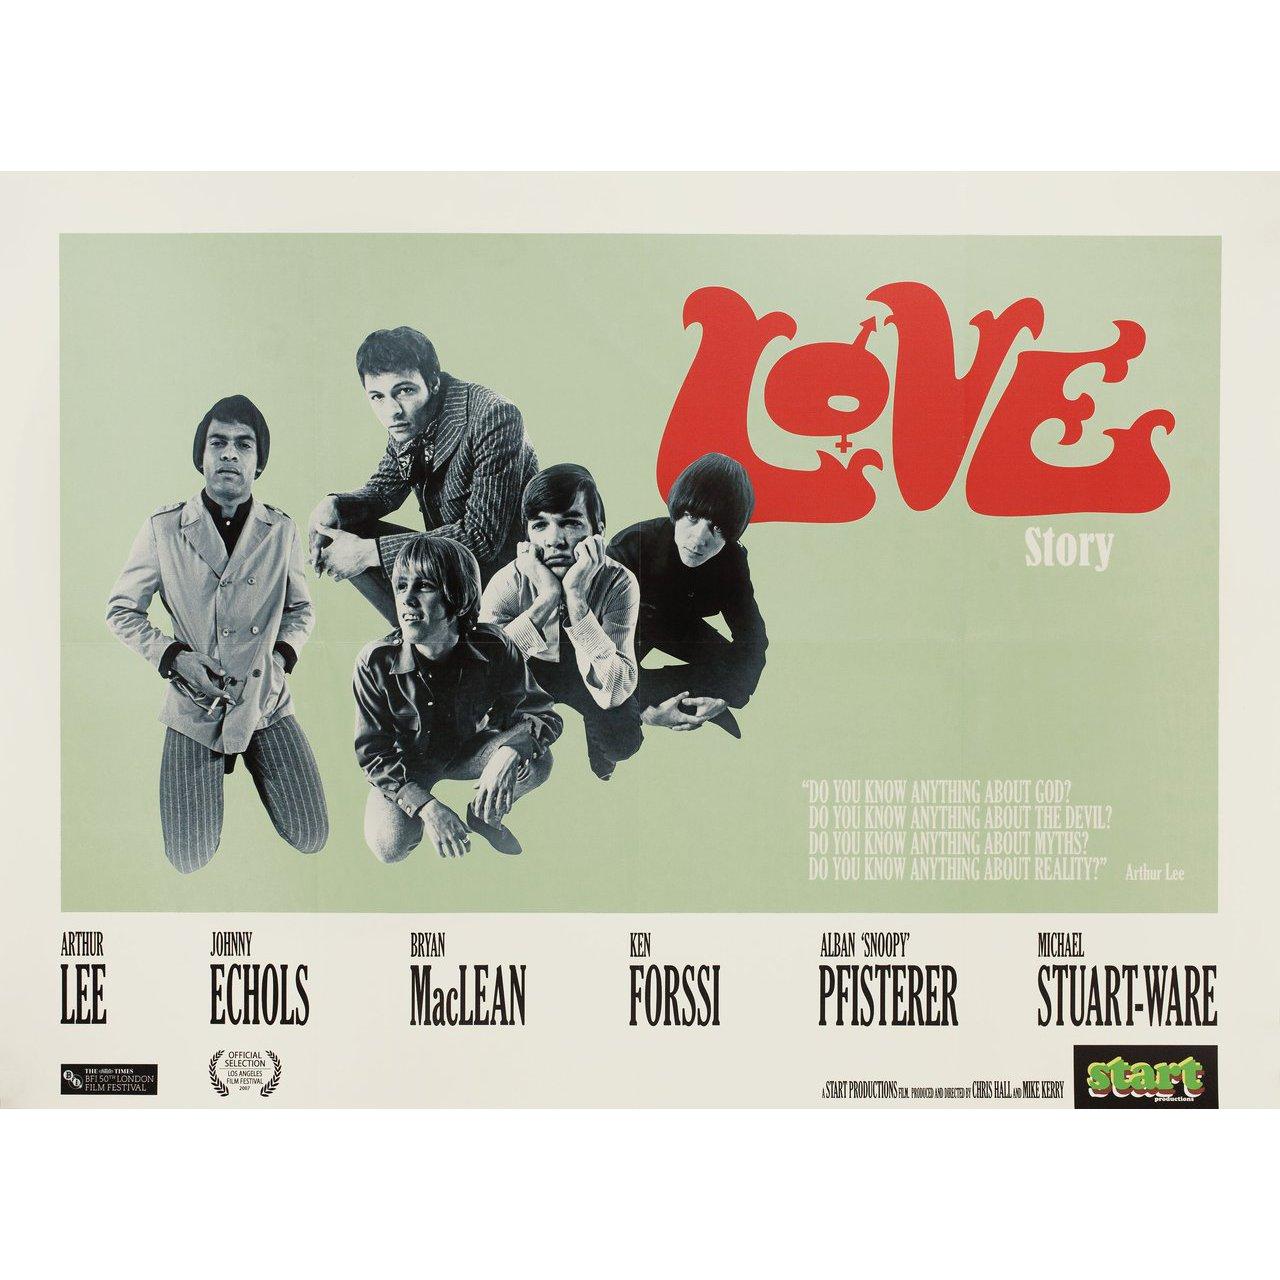 Original 2006 British quad poster for the documentary film Love Story directed by Chris Hall with Bruce Botnick / John Densmore / Johnny Echols / John Fleckenstein. Very Good-Fine condition, folded. Many original posters were issued folded or were